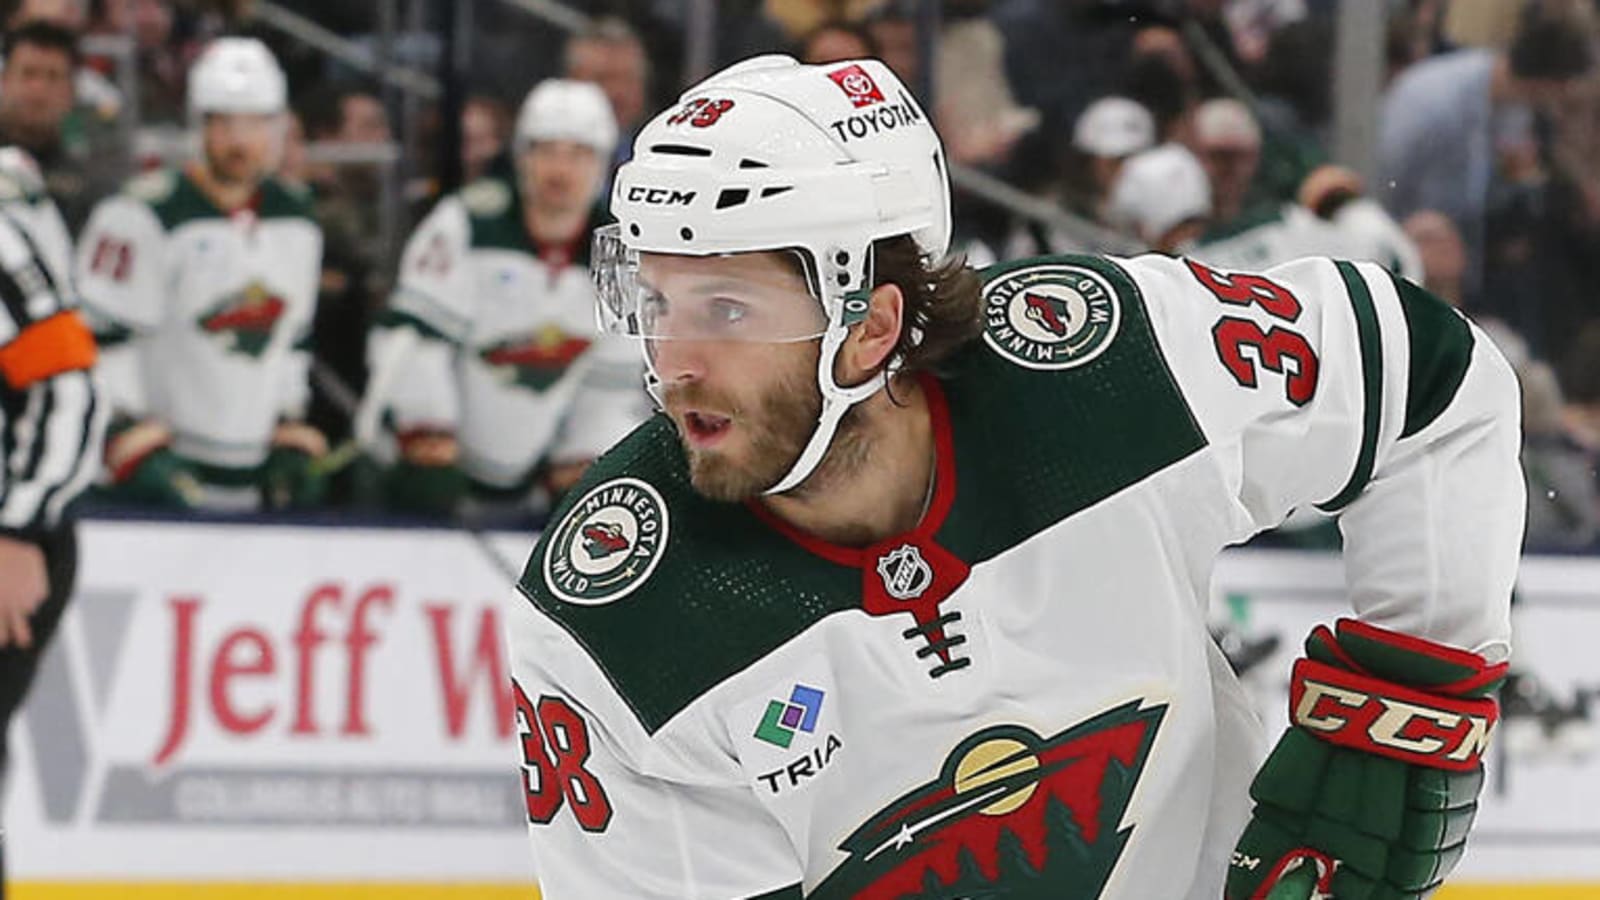 Wild's Hartman receives maximum fine for slash on Flames' Andersson